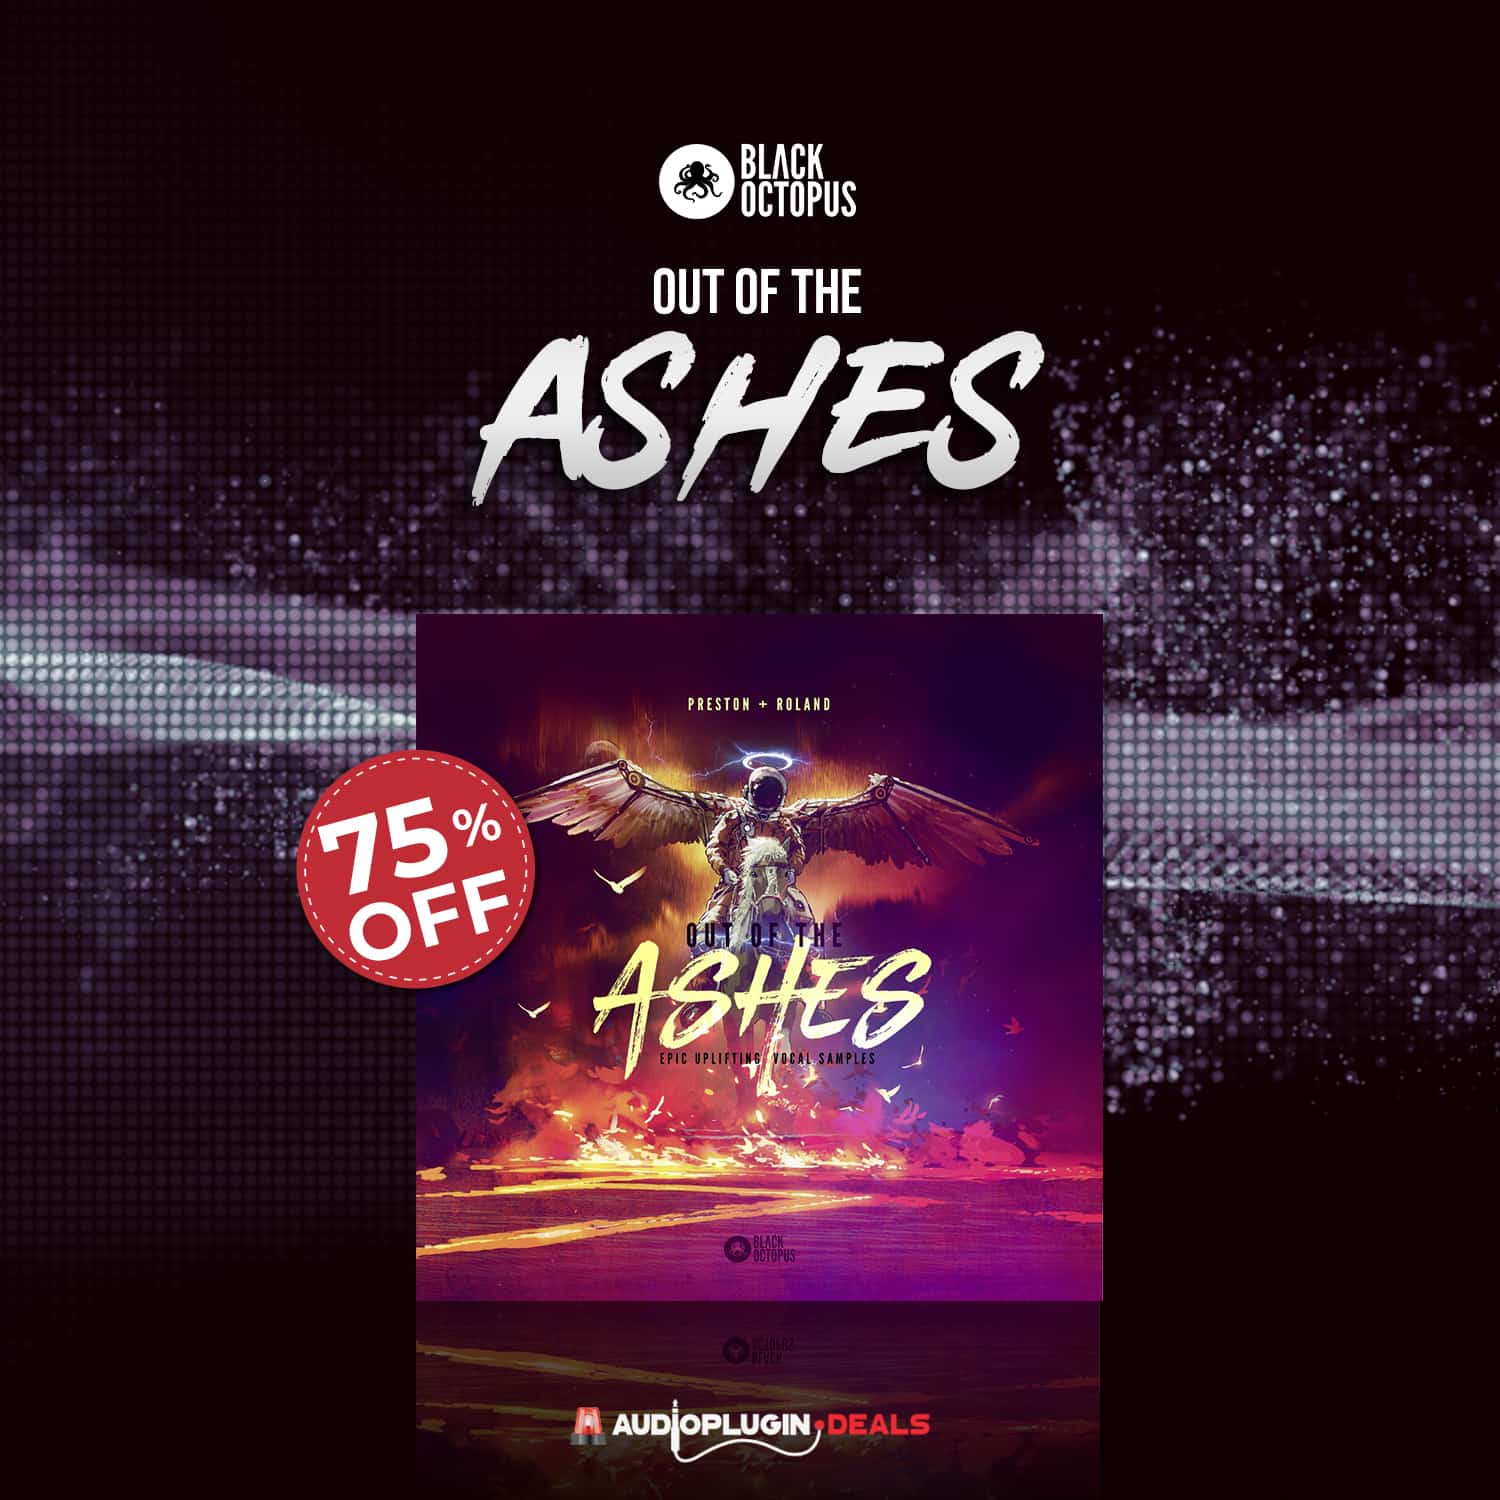 75% OFF Black Octopus Sound – Out Of The Ashes by Preston & Roland